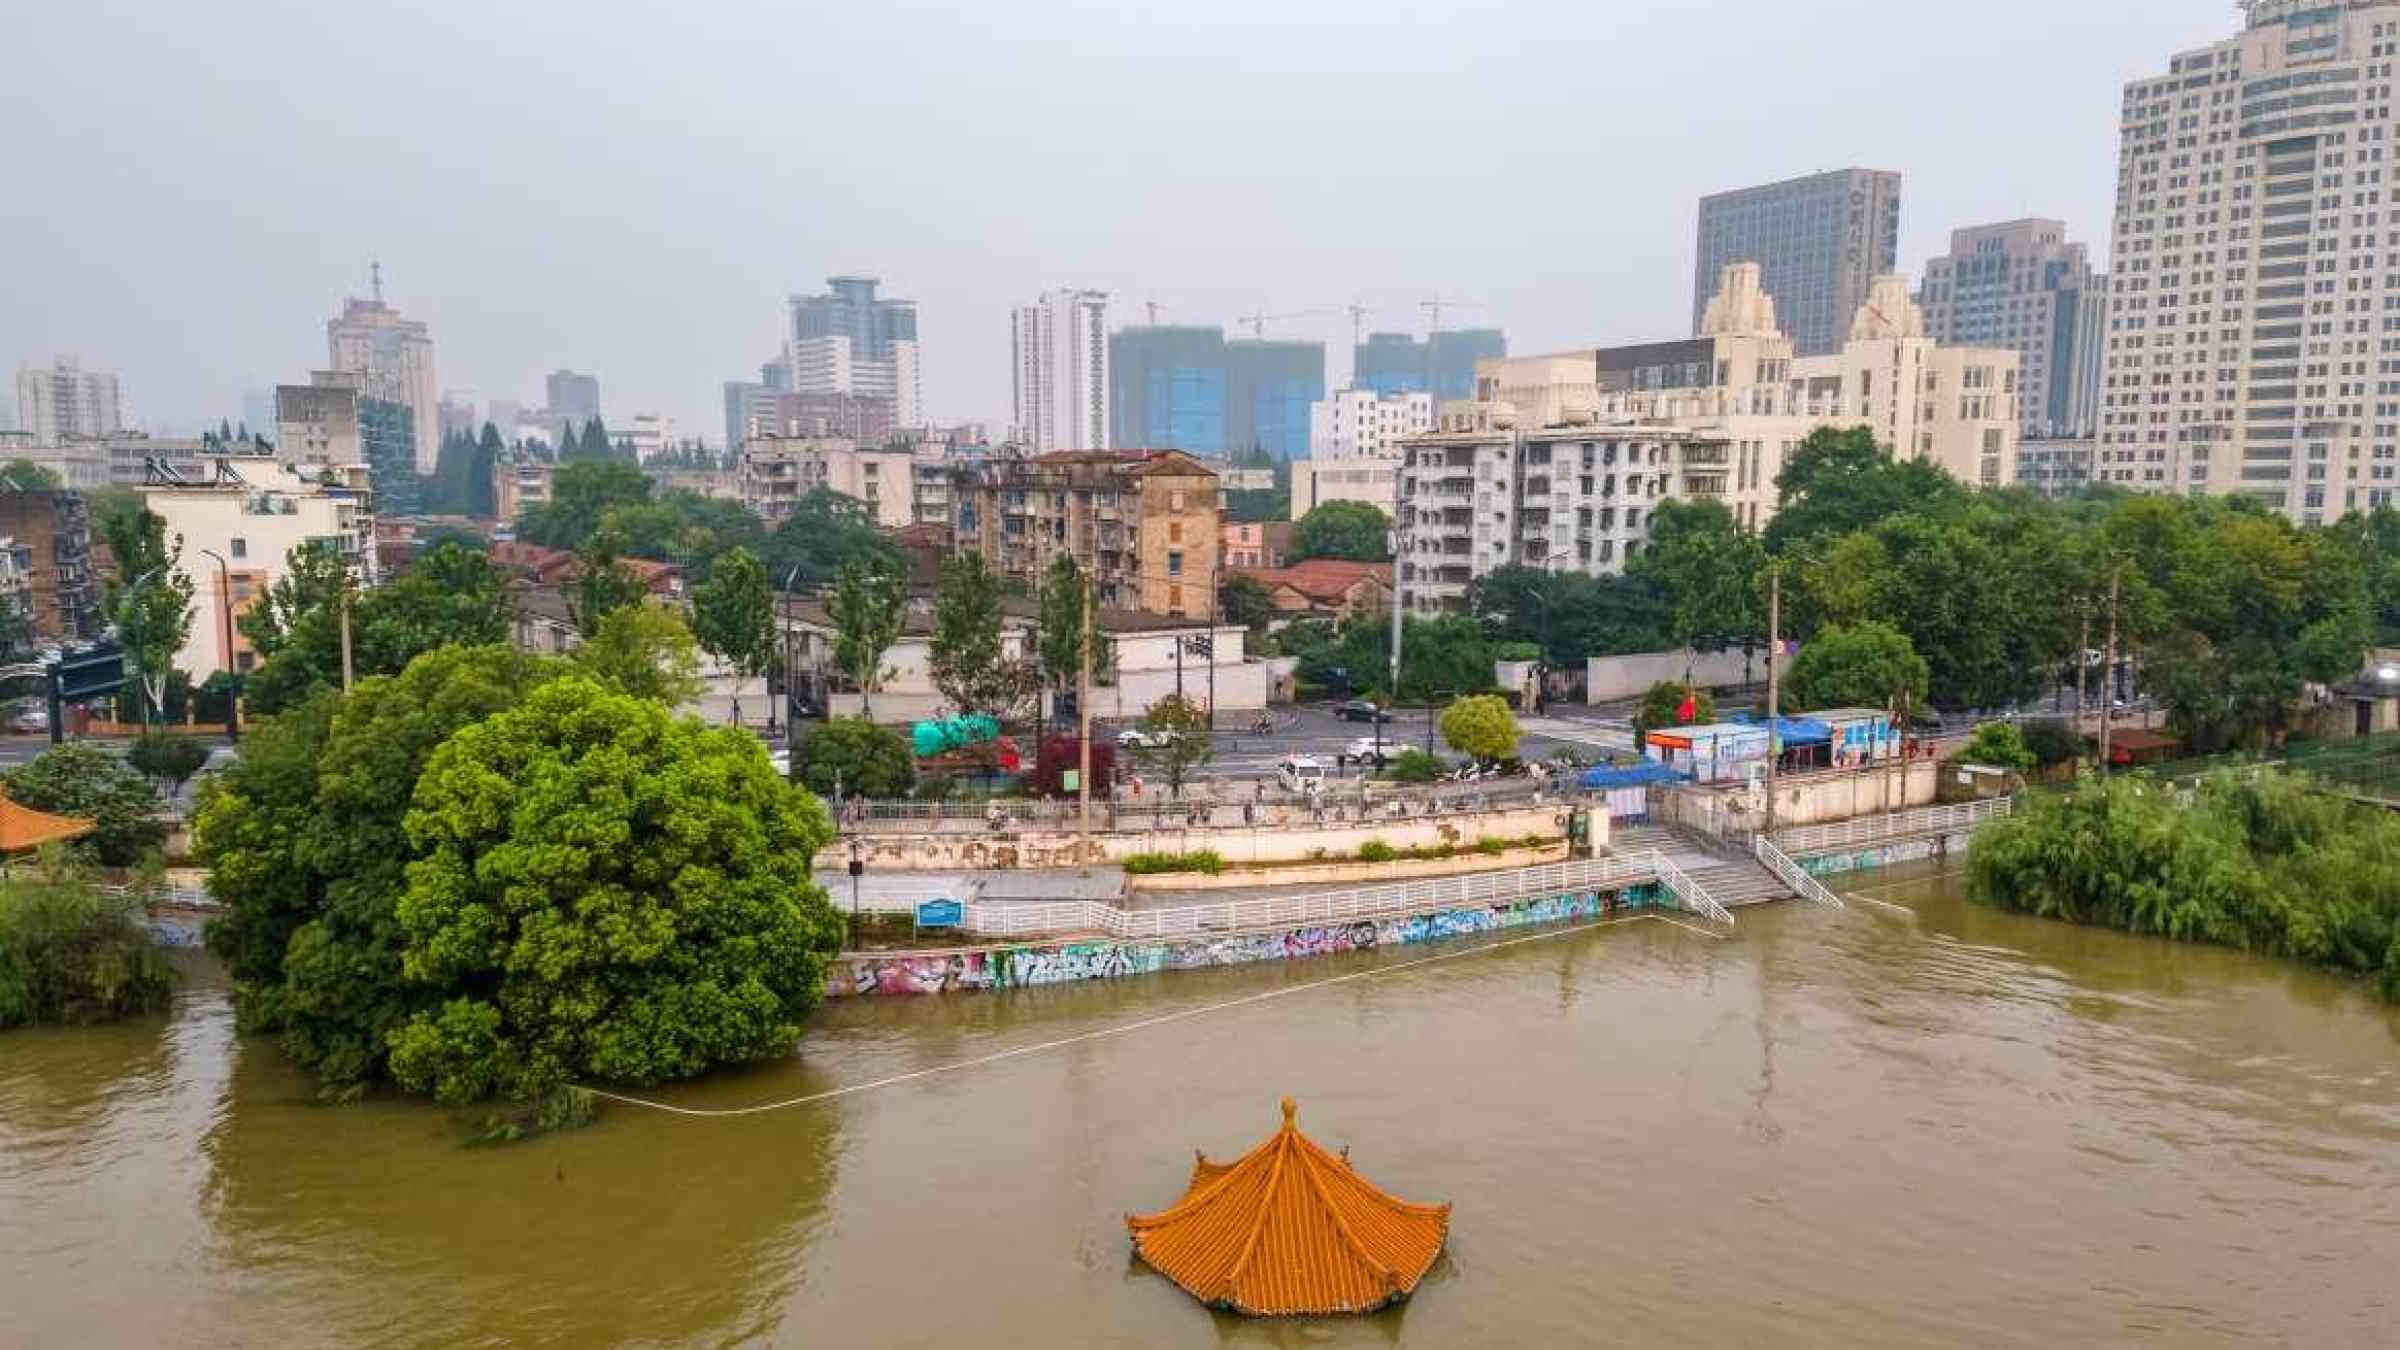 Wuhan,China-July 19 2020:Water level of the Yangtze River at wuhan station reached 28.51 meters, more than one meter above the warning water level. Sleepingpanda / Shutterstock.com